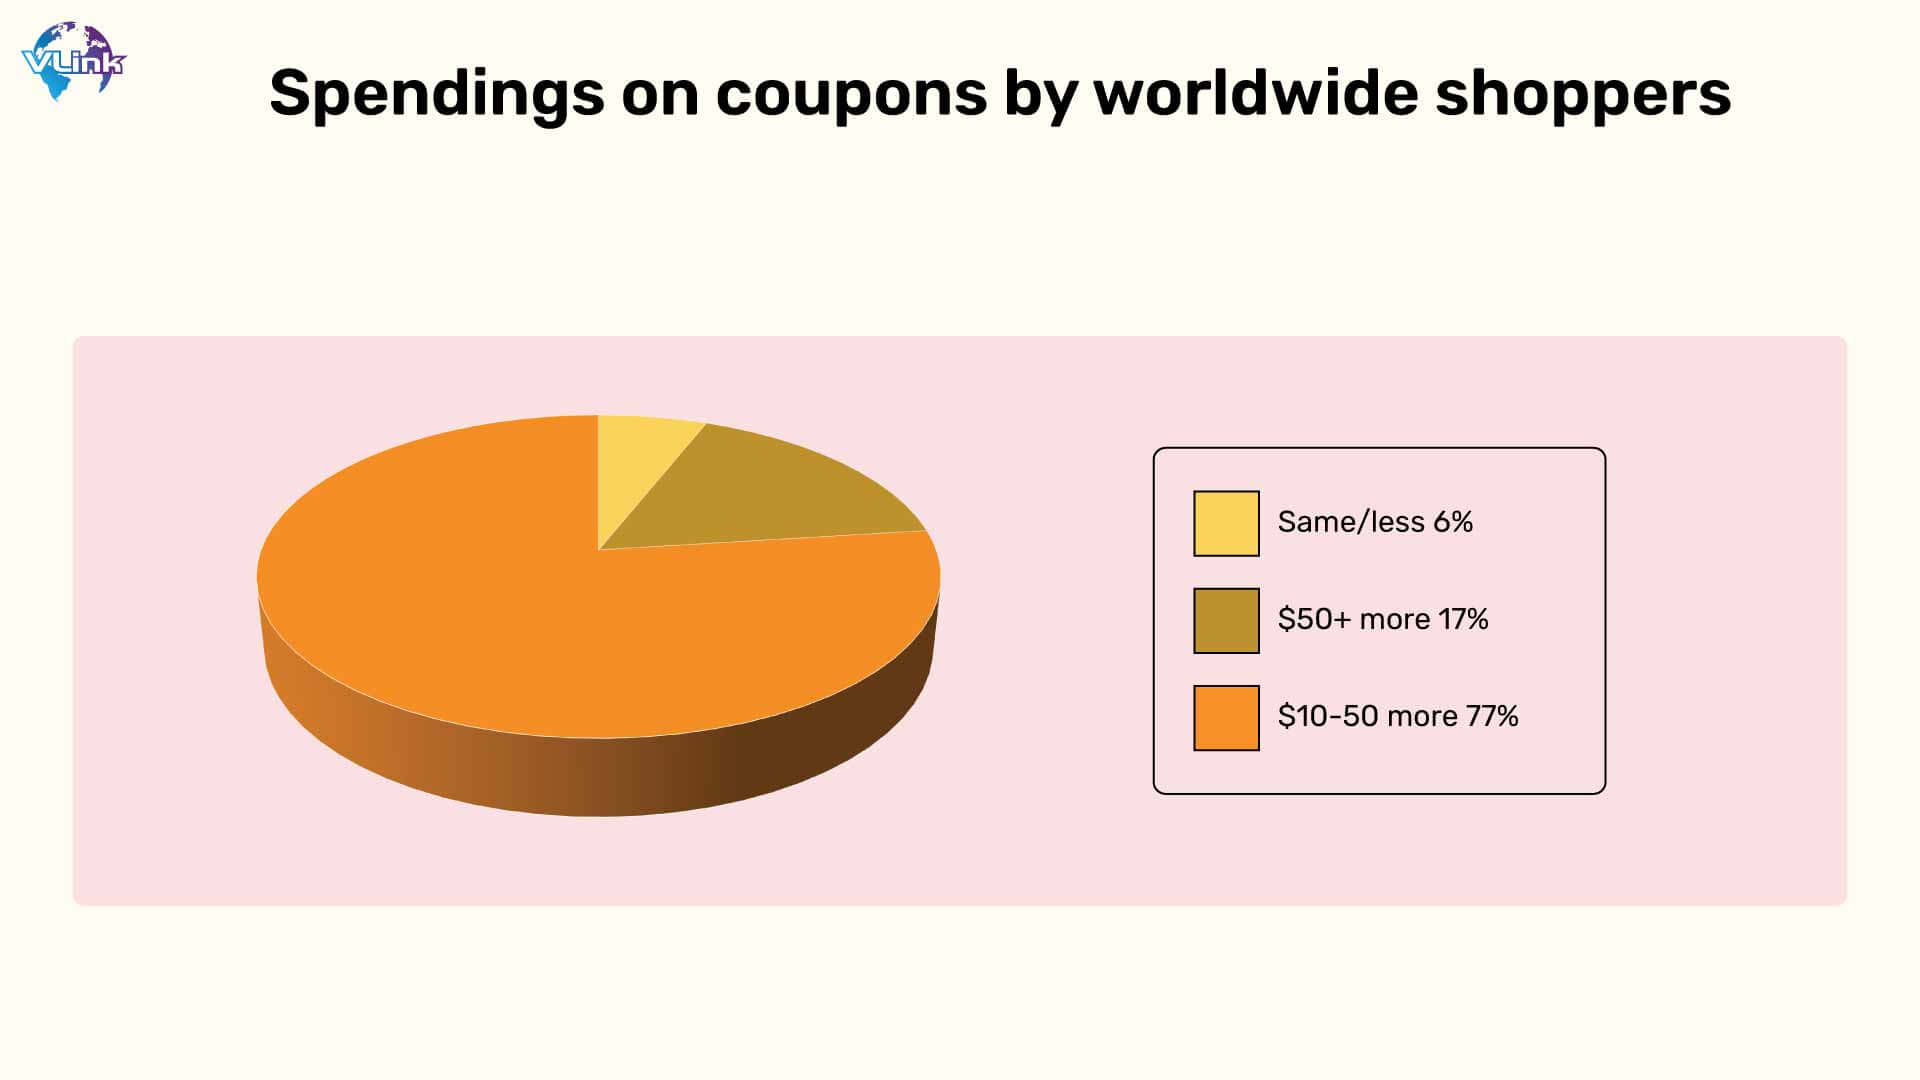 Spendings on coupons by worldwide shoppers